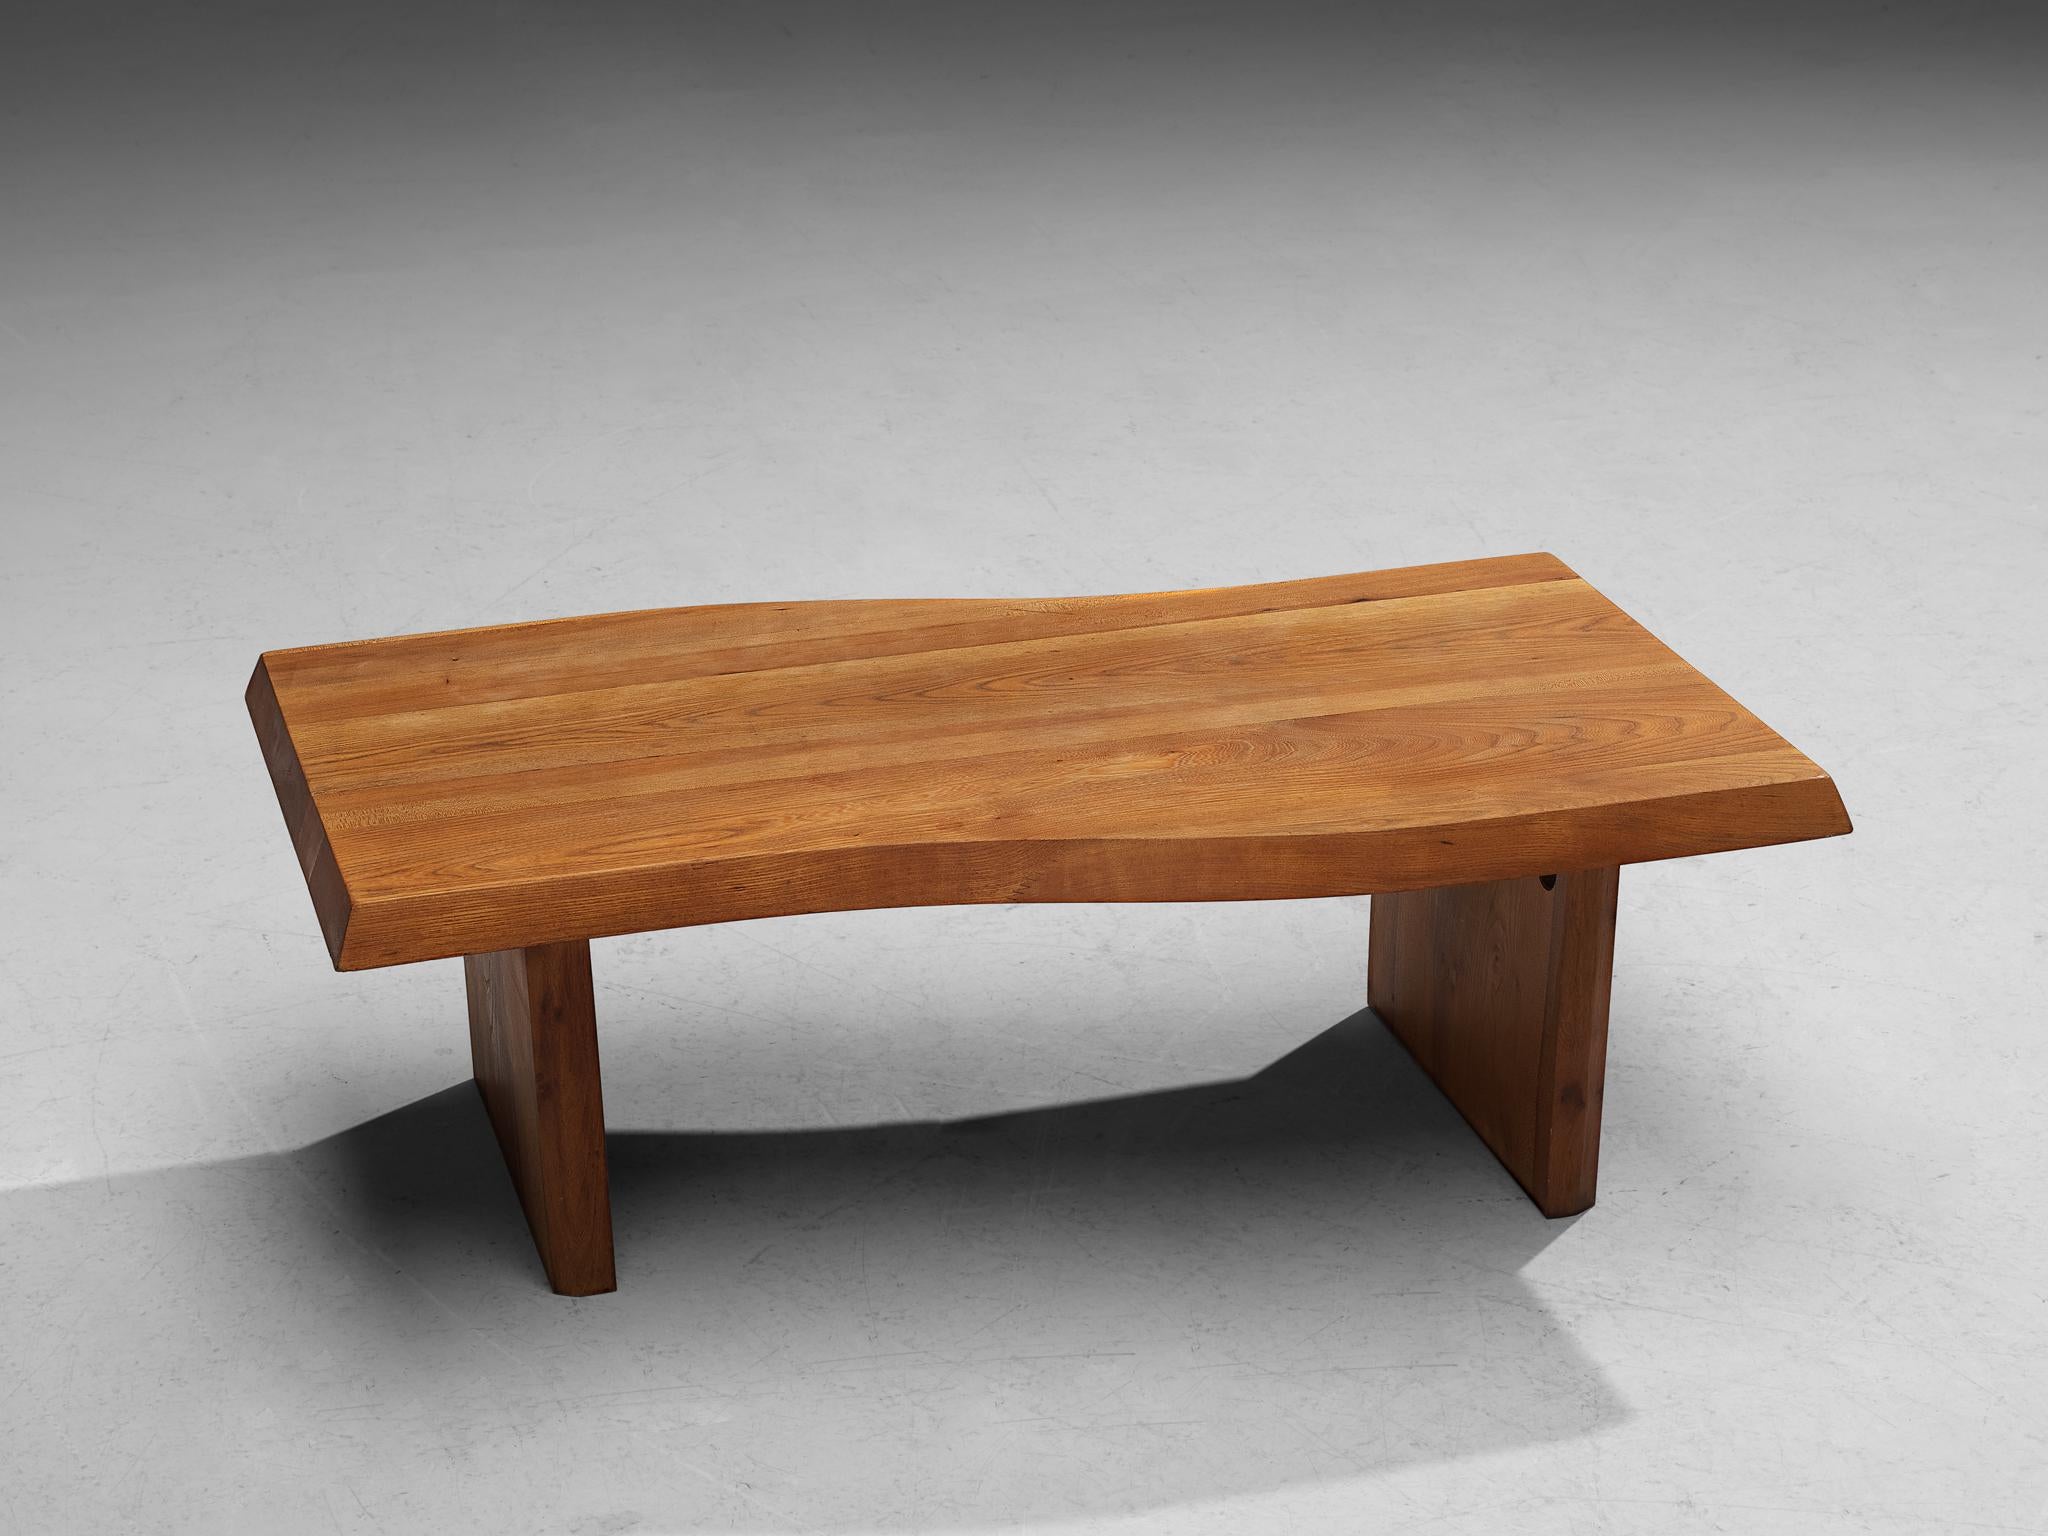 Coffee table, elm, France, 1970s 

The top of this wonderful coffee table is hand carved from an elm tree slab. While the top convinces with its natural and dynamic appearance due to the organic, free flowing edges, the base is expressed through